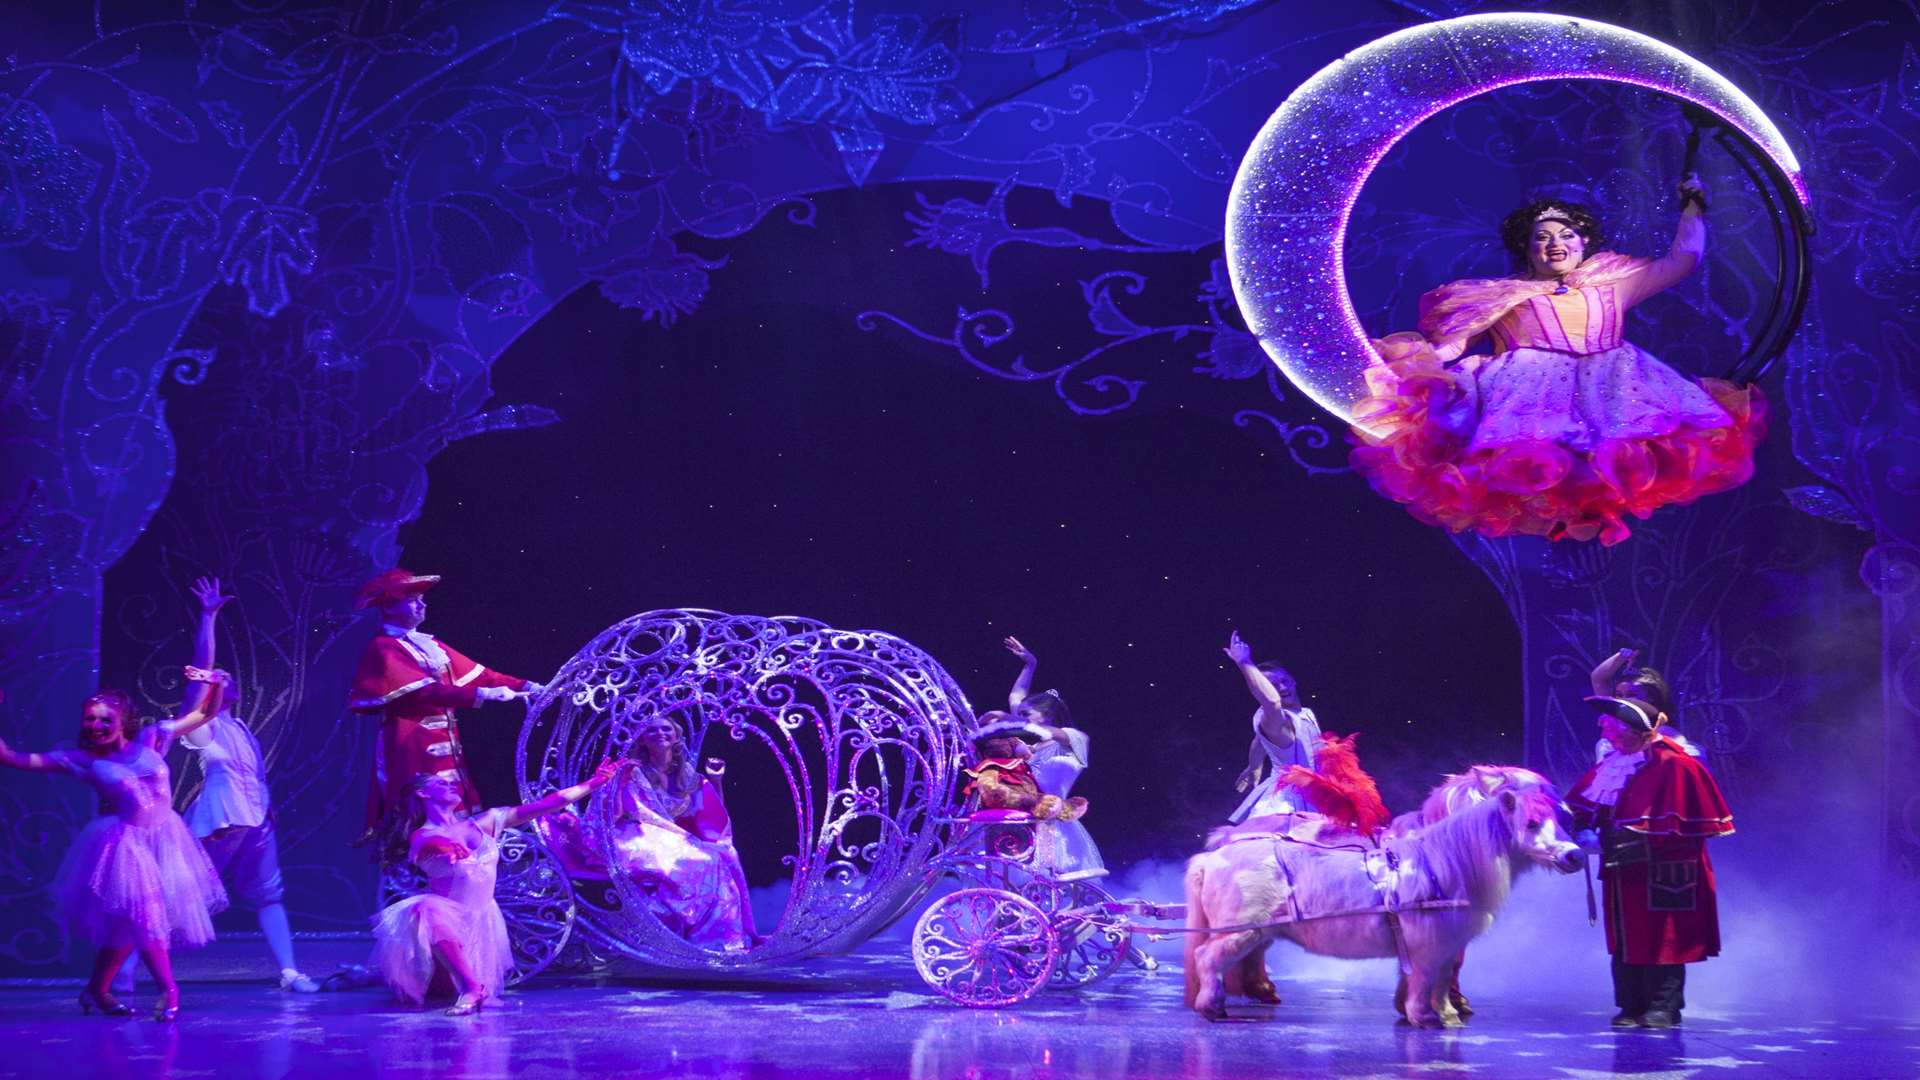 Shetland ponies make their way on stage, as part of Cinderella's carriage to the ball